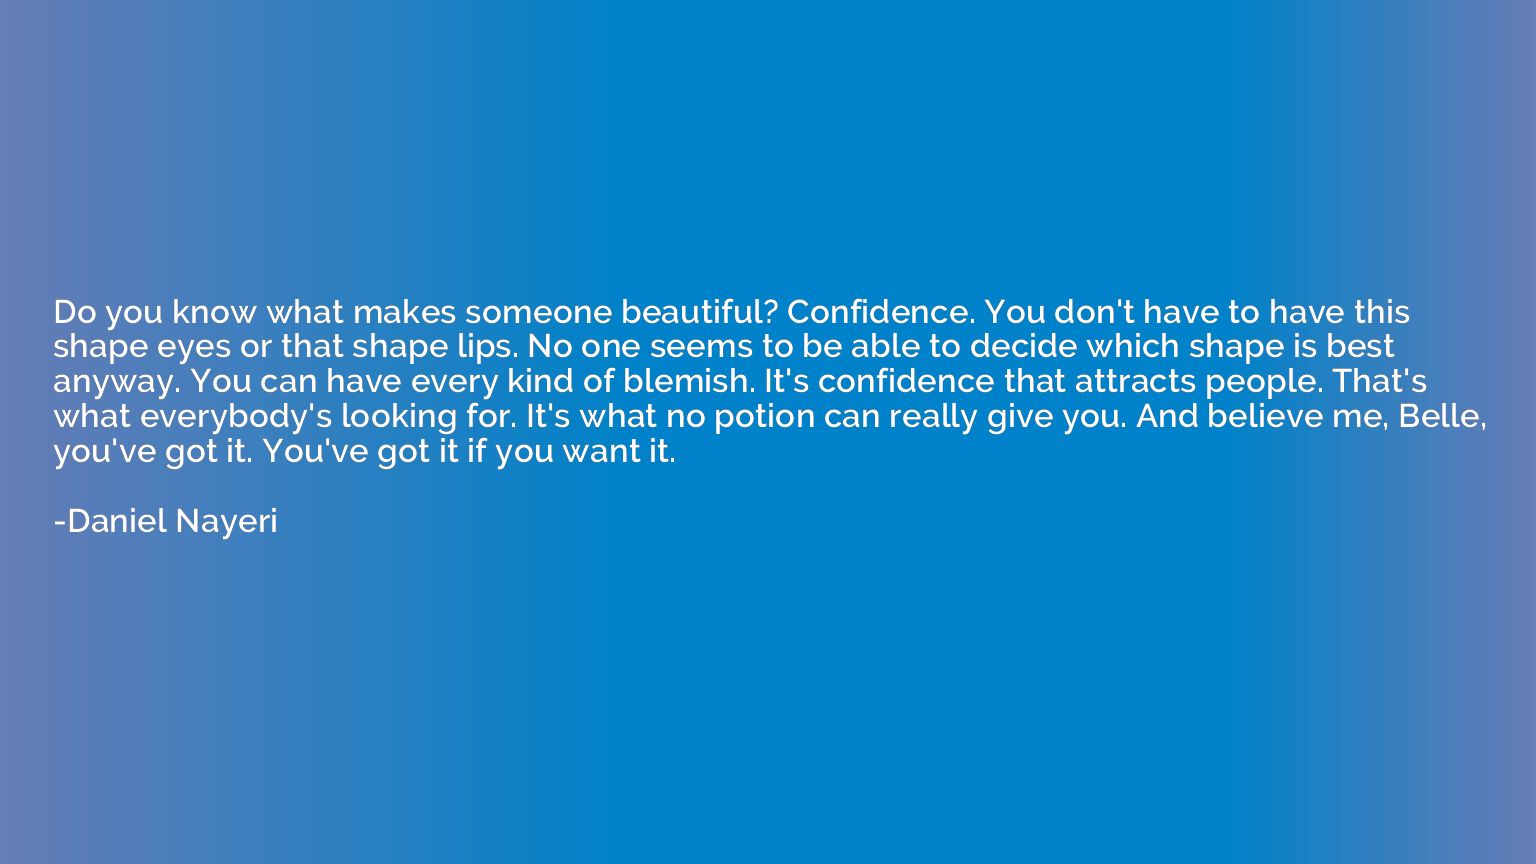 Do you know what makes someone beautiful? Confidence. You do